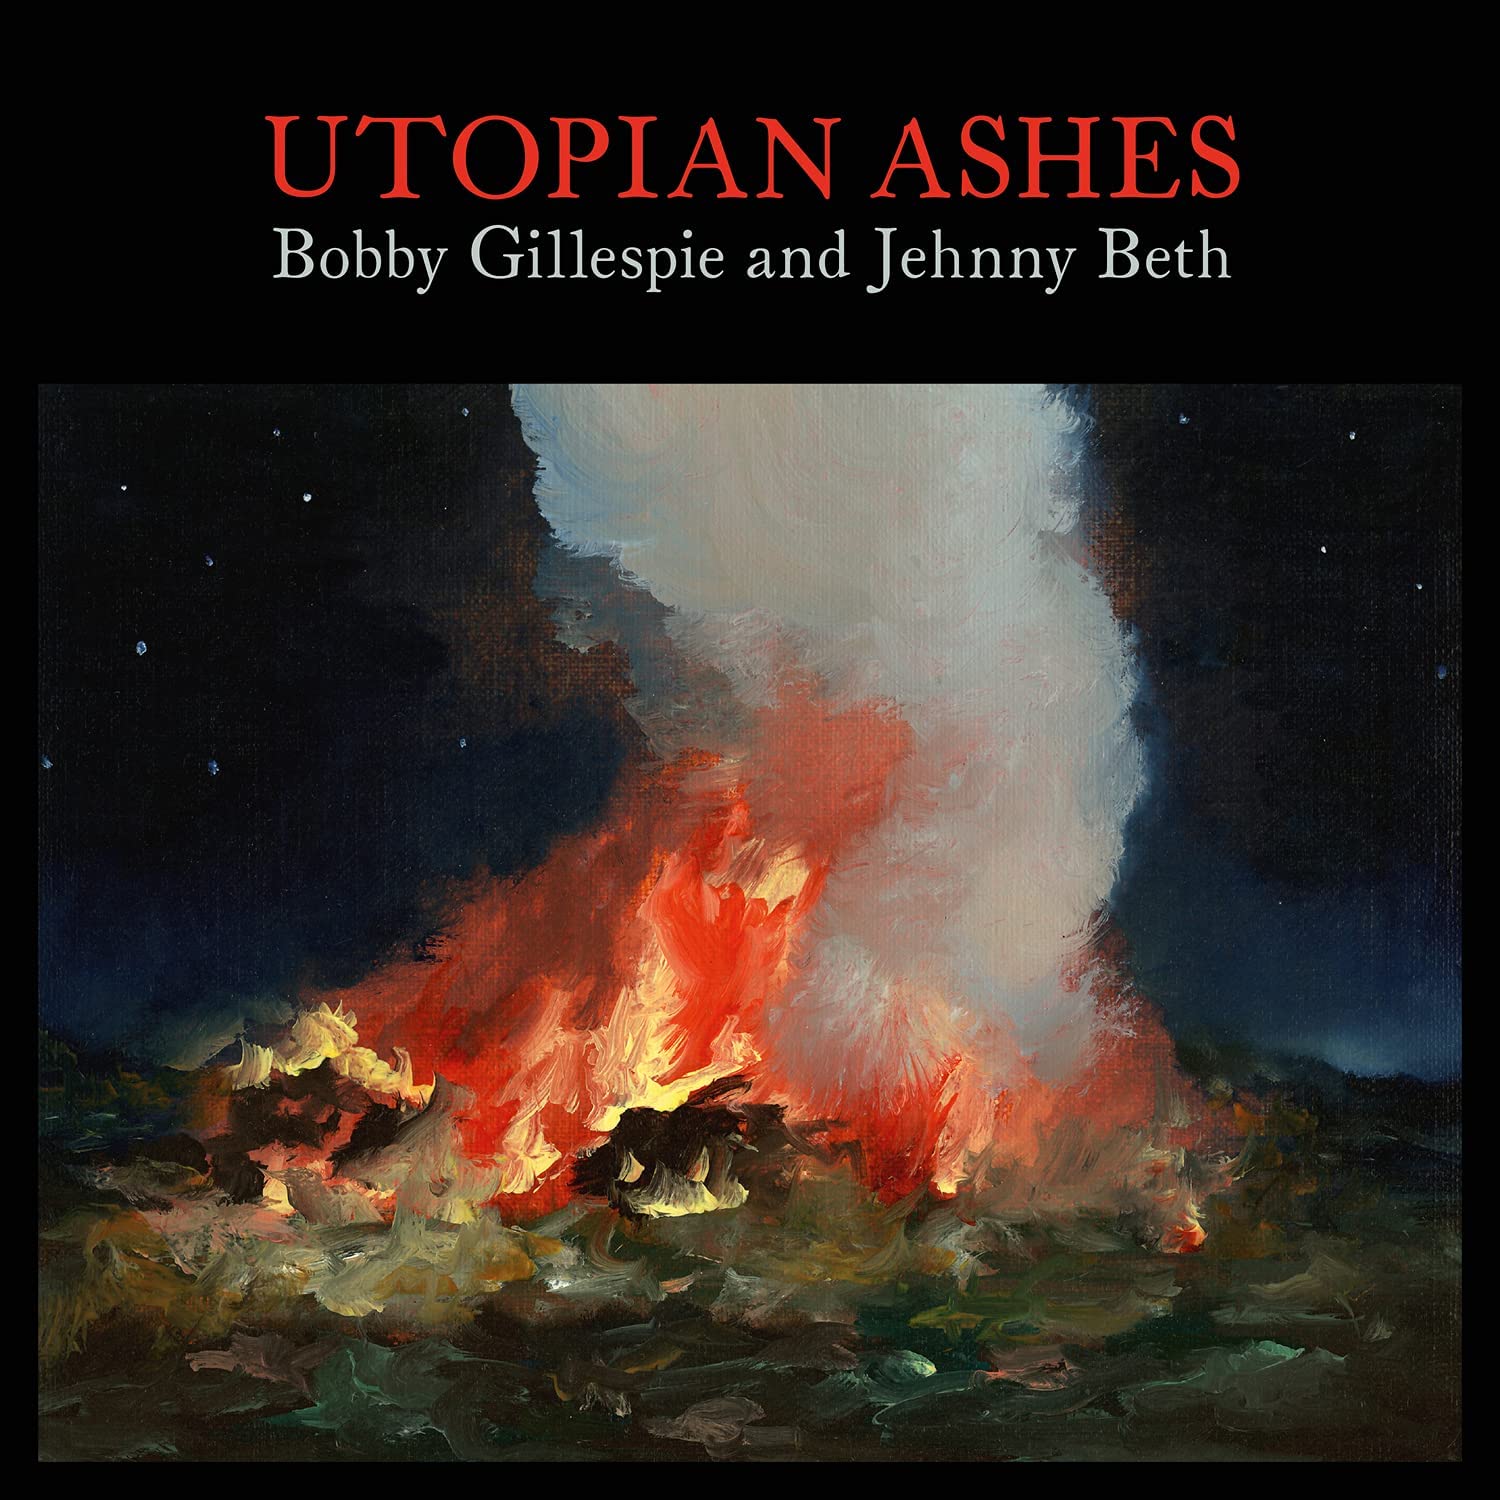 Gillespie, Bobby And Jehnny Beth: Utopian Ashes (Vinyl LP)